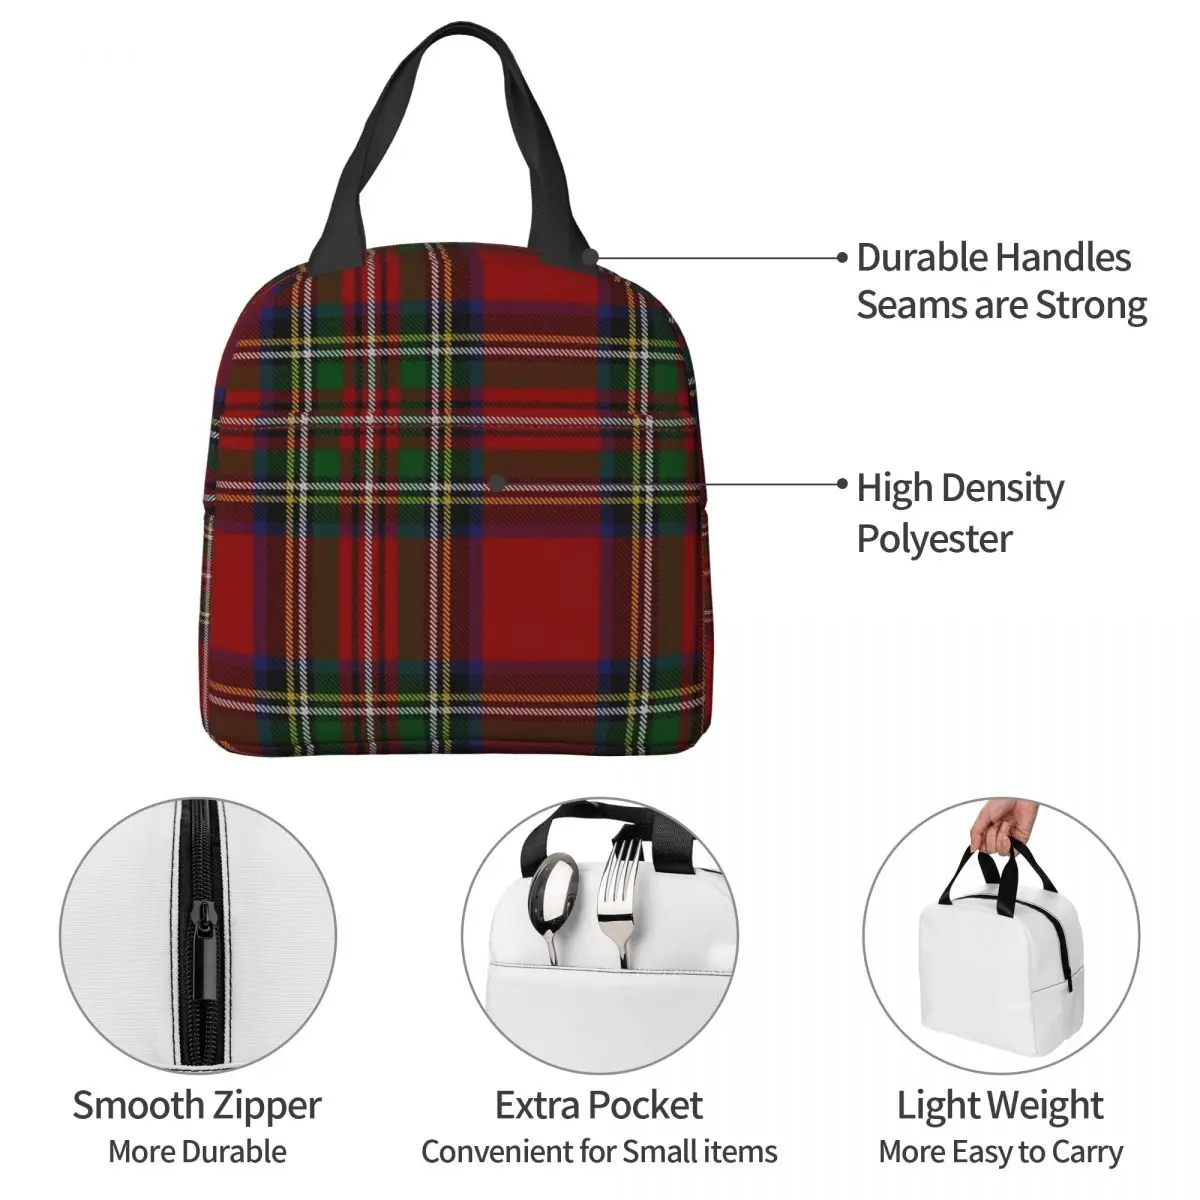 Royal Tartan Plaid Lunch Bag Waterproof Insulated Canvas Cooler Bag Thermal Cold Food Picnic Travel Tote for Women Children images - 6